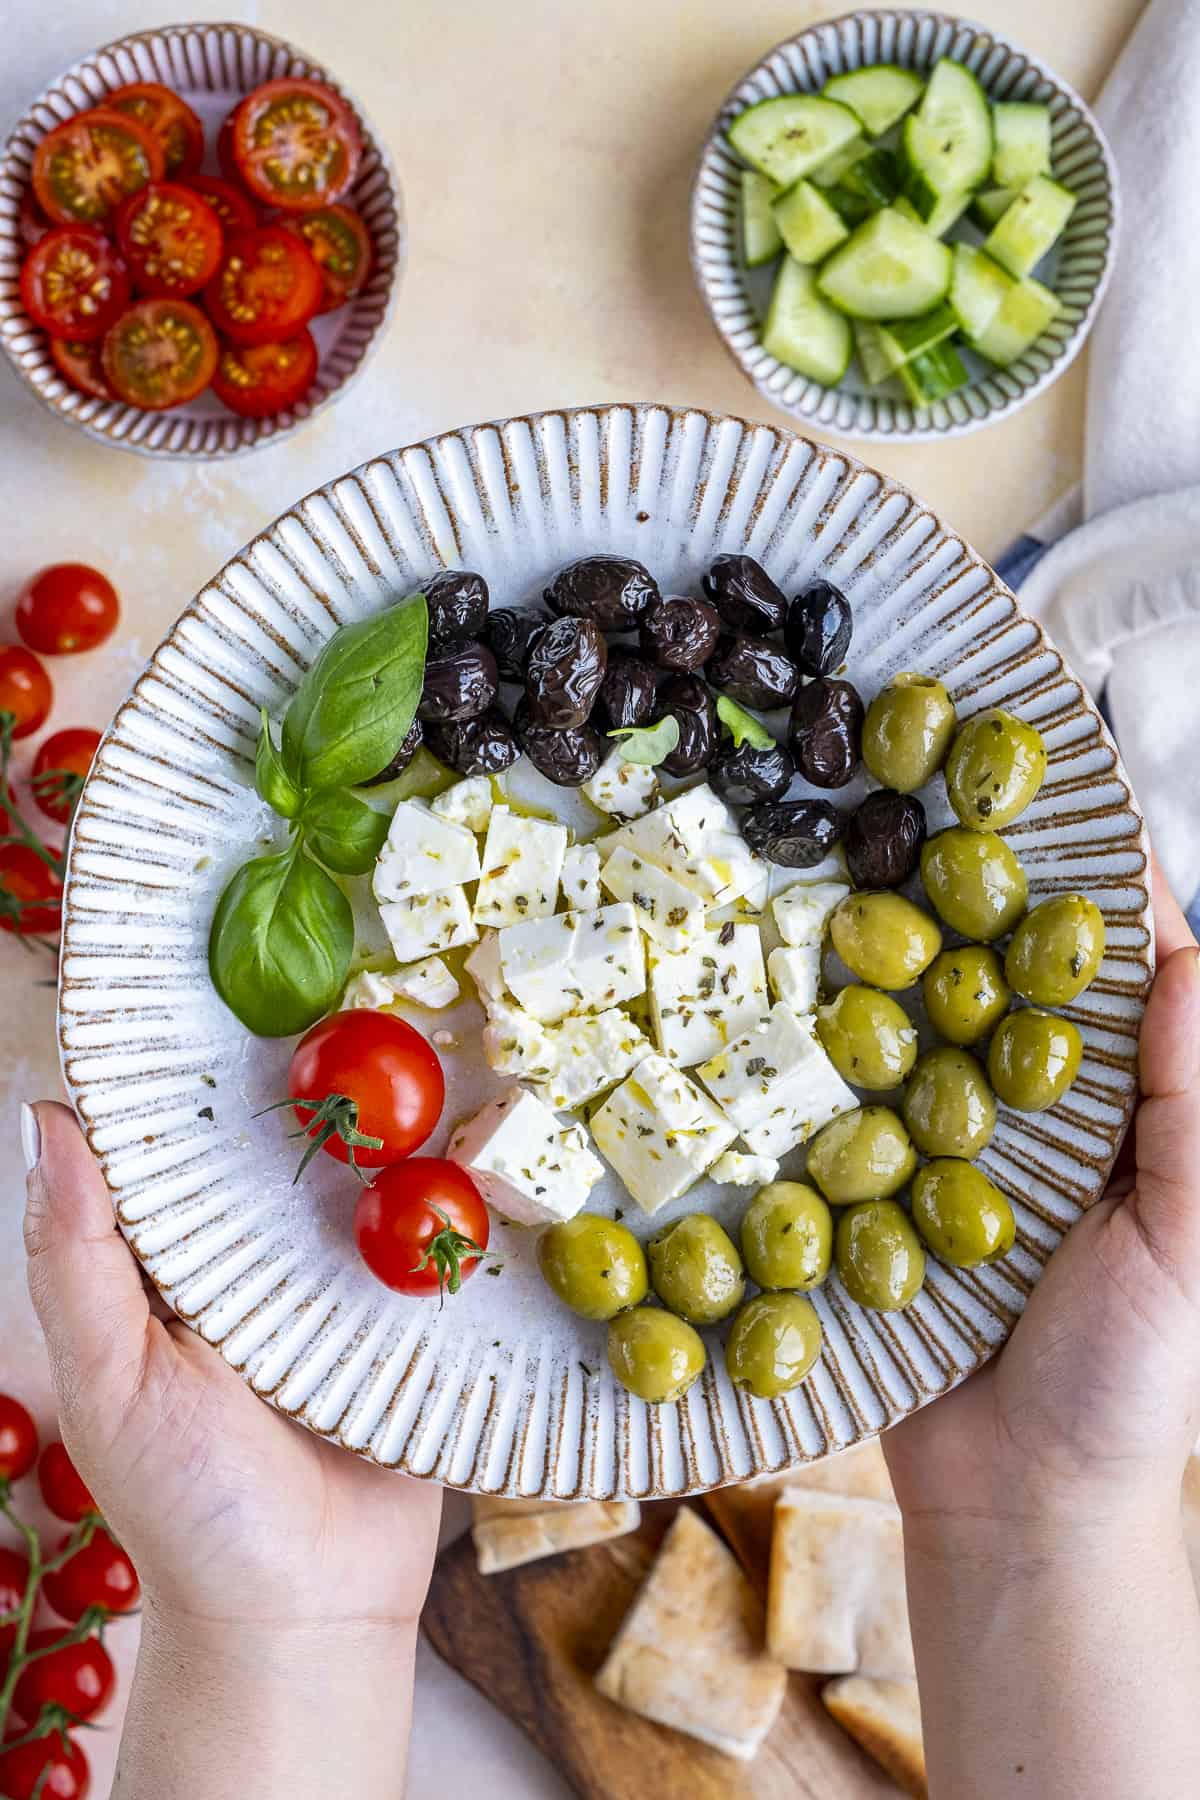 Hands holding a plate full of black olives, green olives, feta cheese and tomatoes.